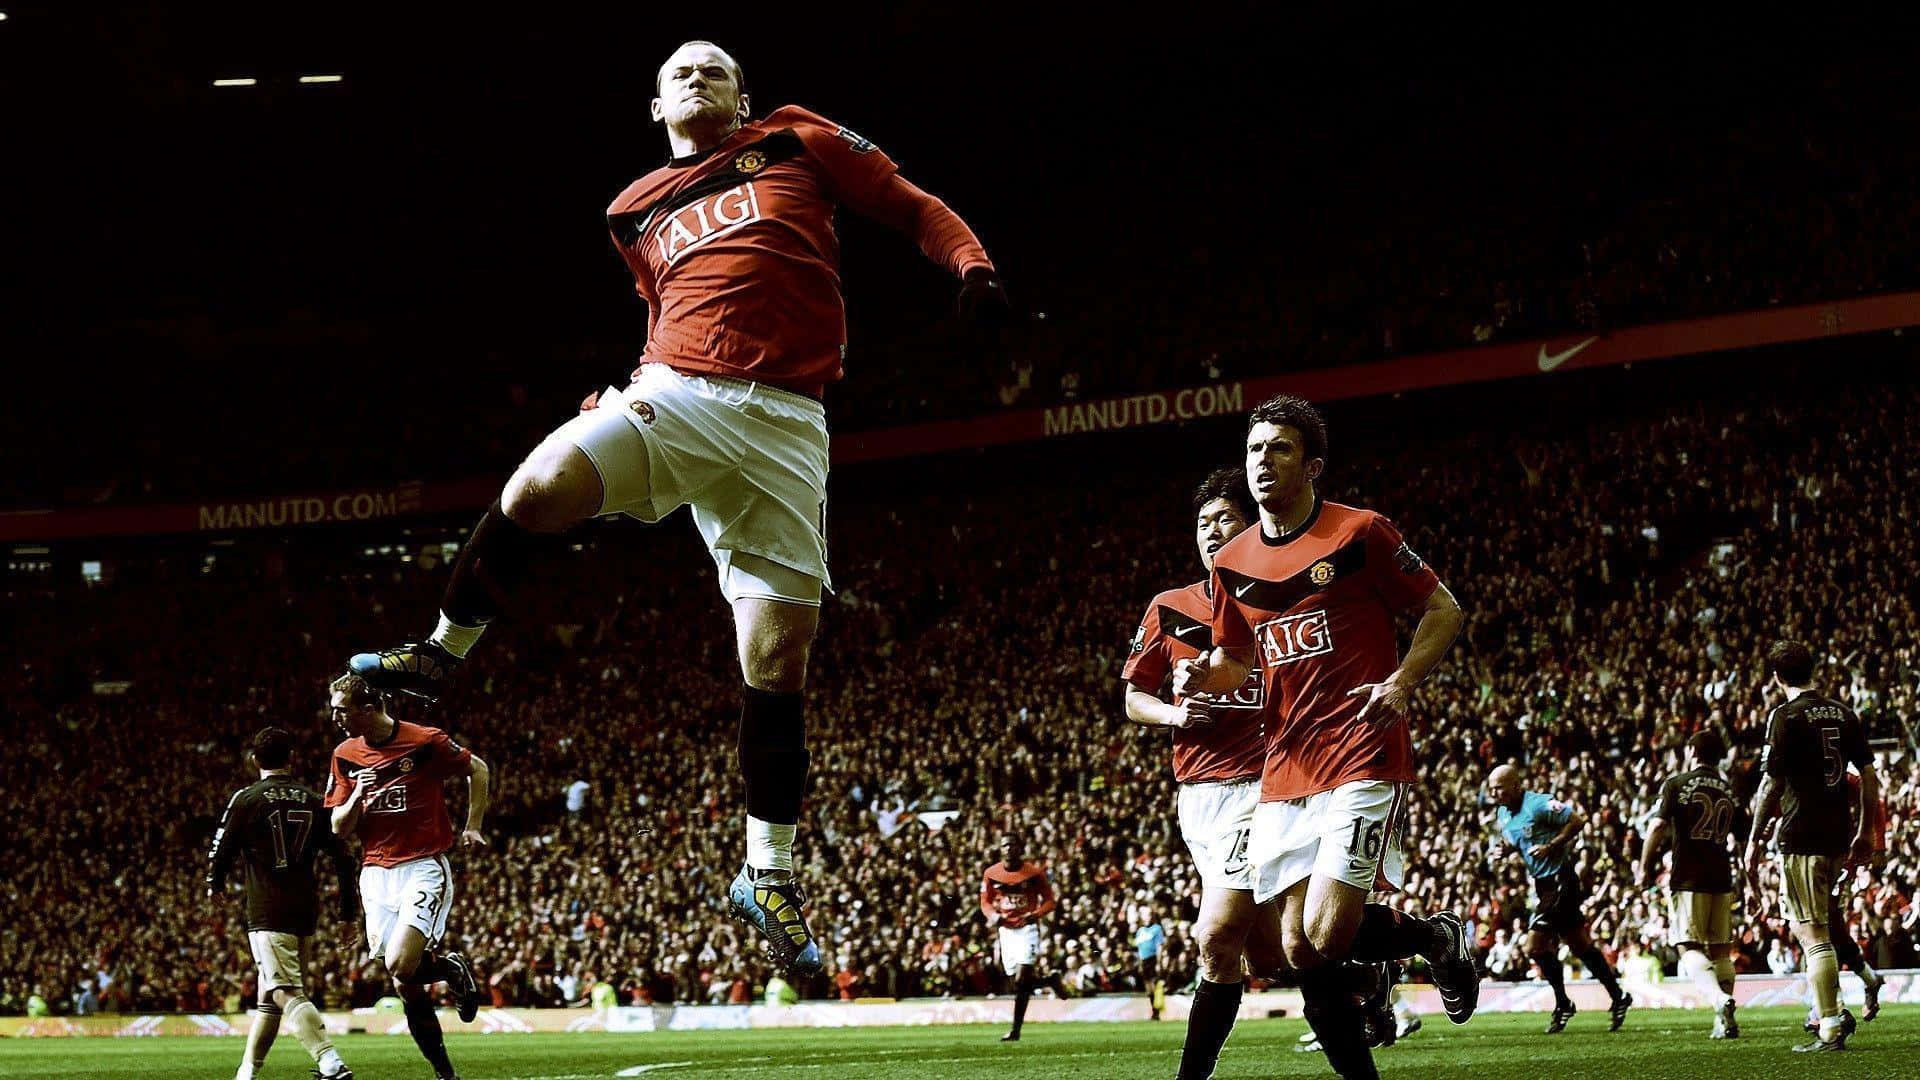 Wayne Rooney In The Air Picture